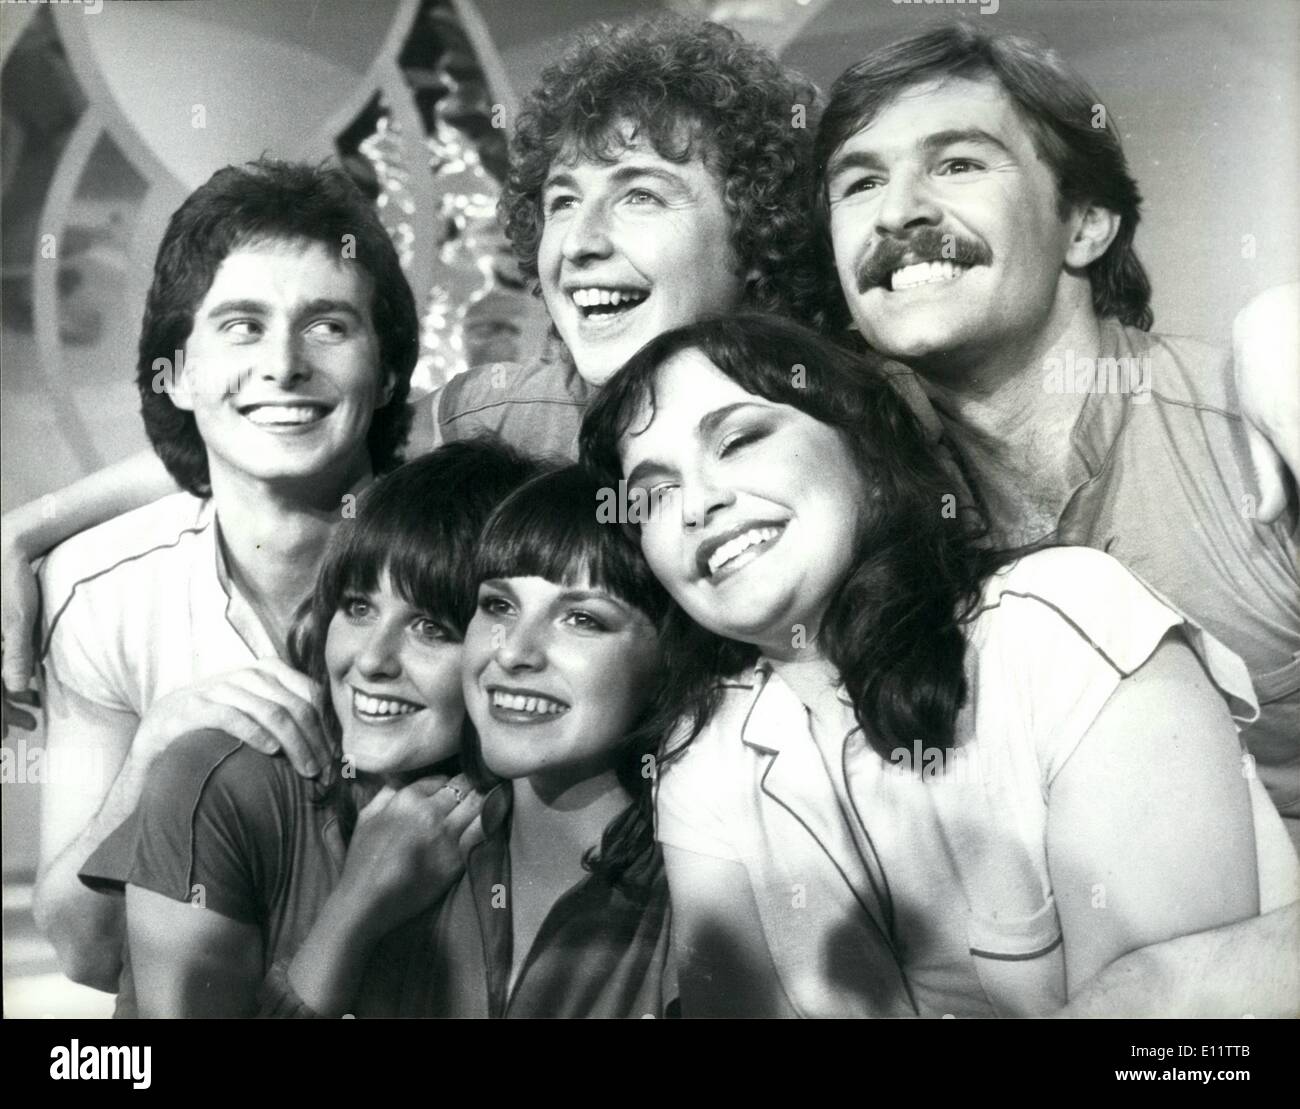 Mar. 27, 1980 - March 27th 1980 Love Enough for Two to represent Britain in Eurovision song contest at the Hague. Love Enough for Two was the winner from the twelve Ã¢â‚¬ËœA Song for Europe' contest held at the BBC Television Theatre, in London last night. The group who sang the song are called Prima Donna, they are Danny Finn, a former member of the New Seekers, Alan Coates, Lanos Aston, The Robbins sisters, Kate and Jane, and Sally Triplett, and they will represent Britain at the Eurovision Song Contest in Holland on April 19th Stock Photo